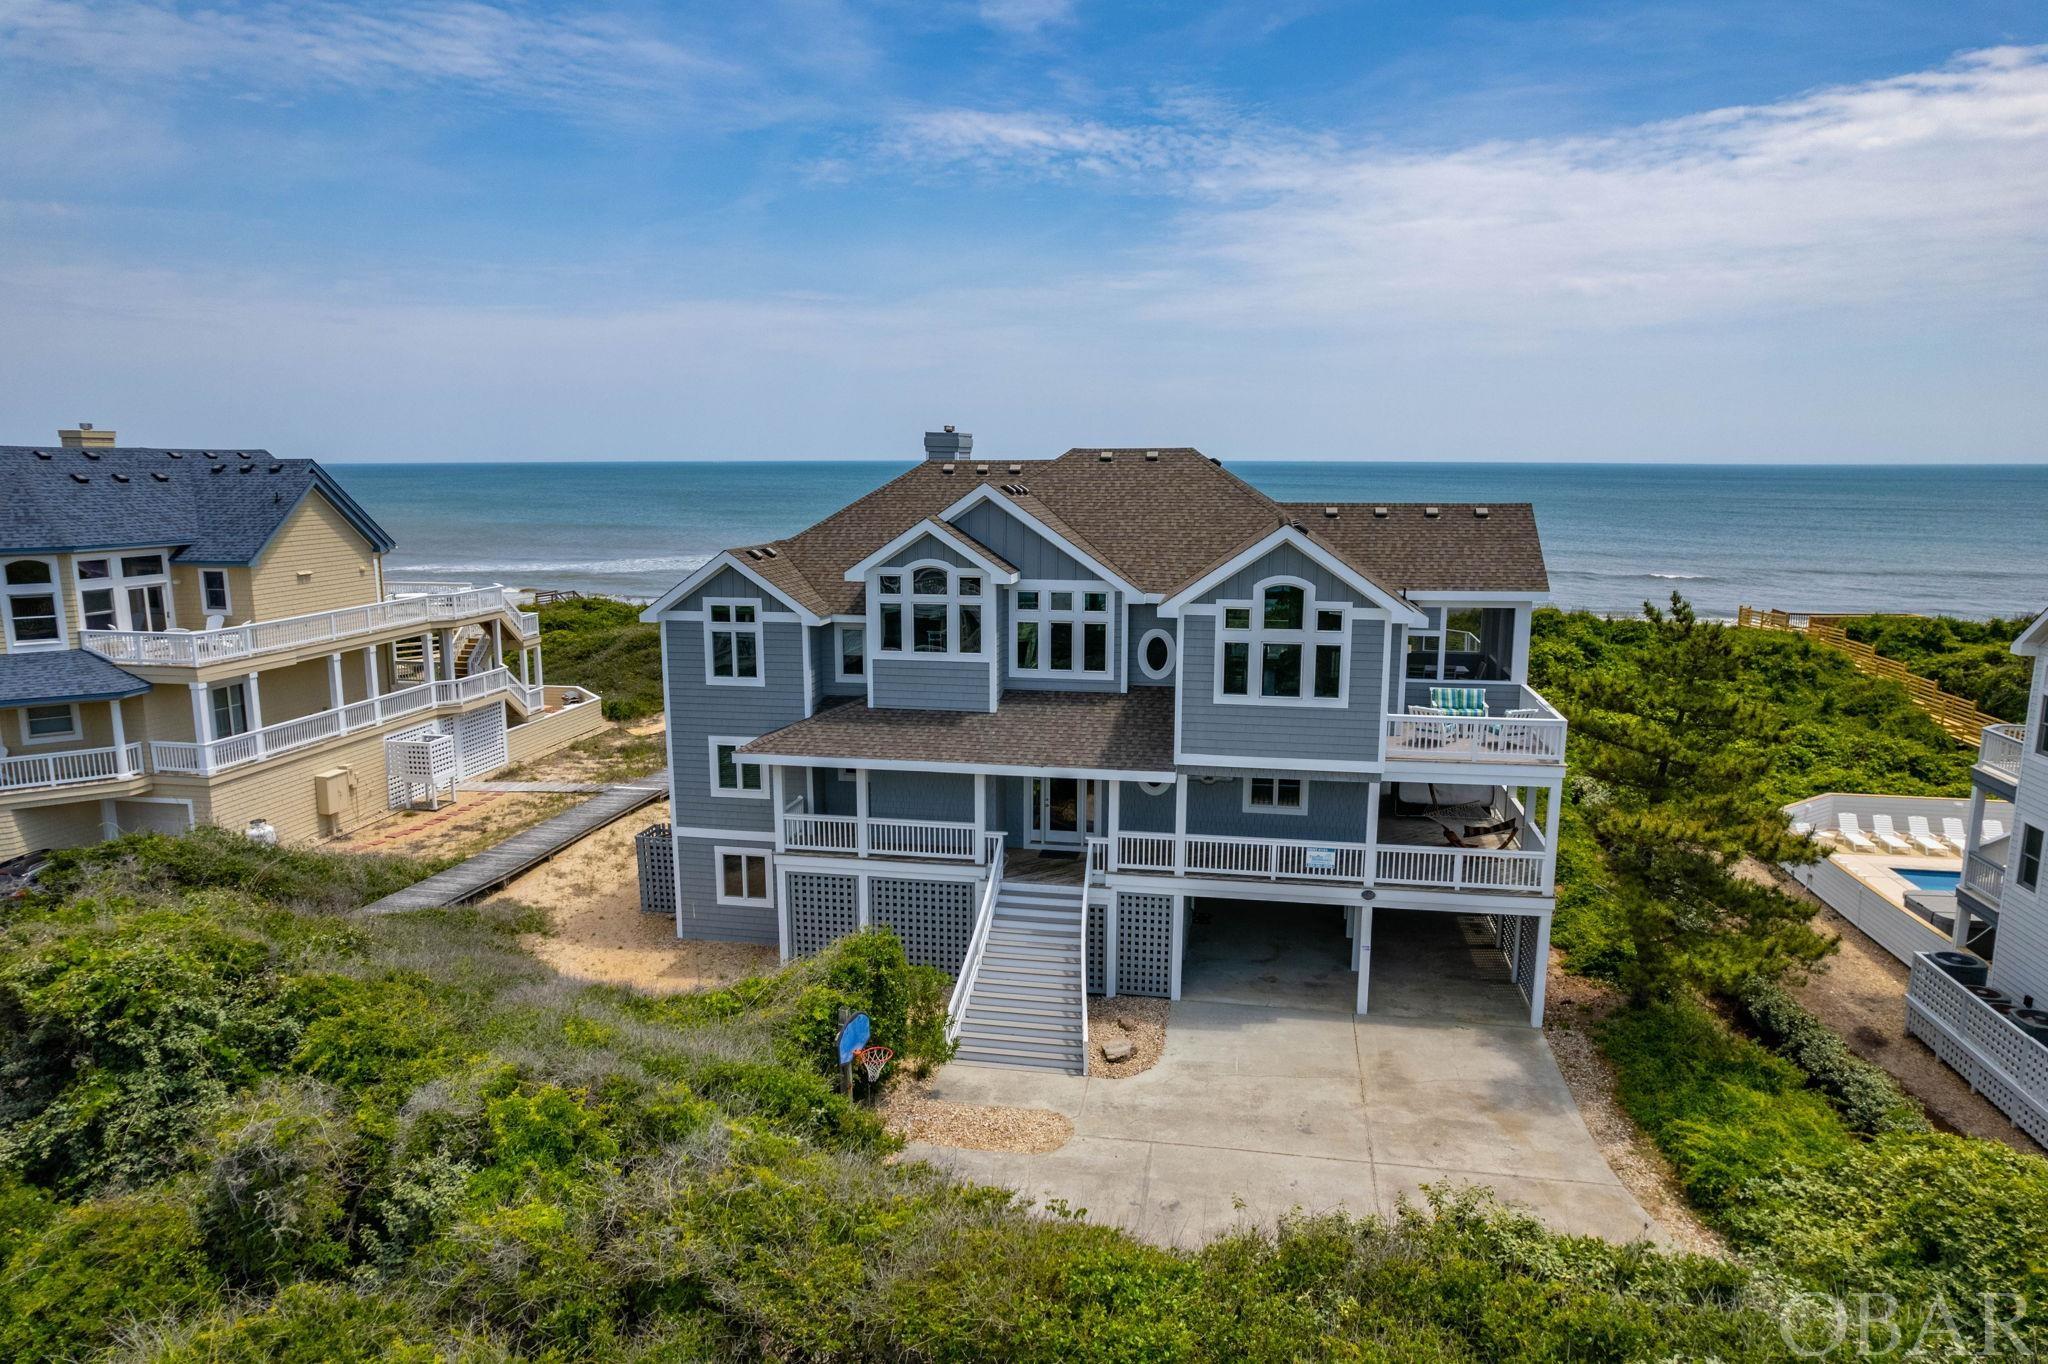 Refined oceanfront in the coveted community of Pine Island. This 7 bedroom, 7.5   bath, spacious home is an absolute show stopper. Step inside Zen Life to a completely care free zone where all the upgrades and renovations have already been completed for your family. The ground floor is perfect for the young at heart where you can watch sports, play pool or just decompress. There are two bedrooms that share an adjoining bathroom. The open expansive pool area features a gunite heated pool, hot tub open to the stars at night, a hammock to sunbathe, outisde shower and access to a full cabana bathroom. Simply ride in the elevator to a mid-level where you will find the front entry way/foyer and 4 ensuite bedrooms with stylish furnishings, artwork and deck space. There is also a second hot tub on the south east corner that provides excellent privacy for large groups. The top floor boasts beautiful panoramic views of the ocean and sound. Gorgeous refinished hard wood floors shine and showcase the wall of windows facing the Atlantic Ocean.  This floor provides comfort and class for your guests and family. There are 2 refrigerators, 2 dishwashers, a wine cooler and high end gas cooktop and oven for the cooking extravaganza to begin. The recently redone TREX decks and stainless steel rail system exude the modern feel of beach living. With all the renovations done, there is nothing left to do except meditate in the bliss of a day in Zen Life. Some of the recent upgrades: new HVAC 2021, ice maker, top floor bathroom remodel, all new quartz countertops for 6 bathrooms, refinished hardwood floor, mid-level and ground floor Luvury Vinyl Tile and paint, 3 new dishwashers and refrigerator, exterior paint, PVC trim and PVC soffits, 4 new sliders, 8 new windows, pool deck releveling, and a new gas stove. Drift away today in this dream home.